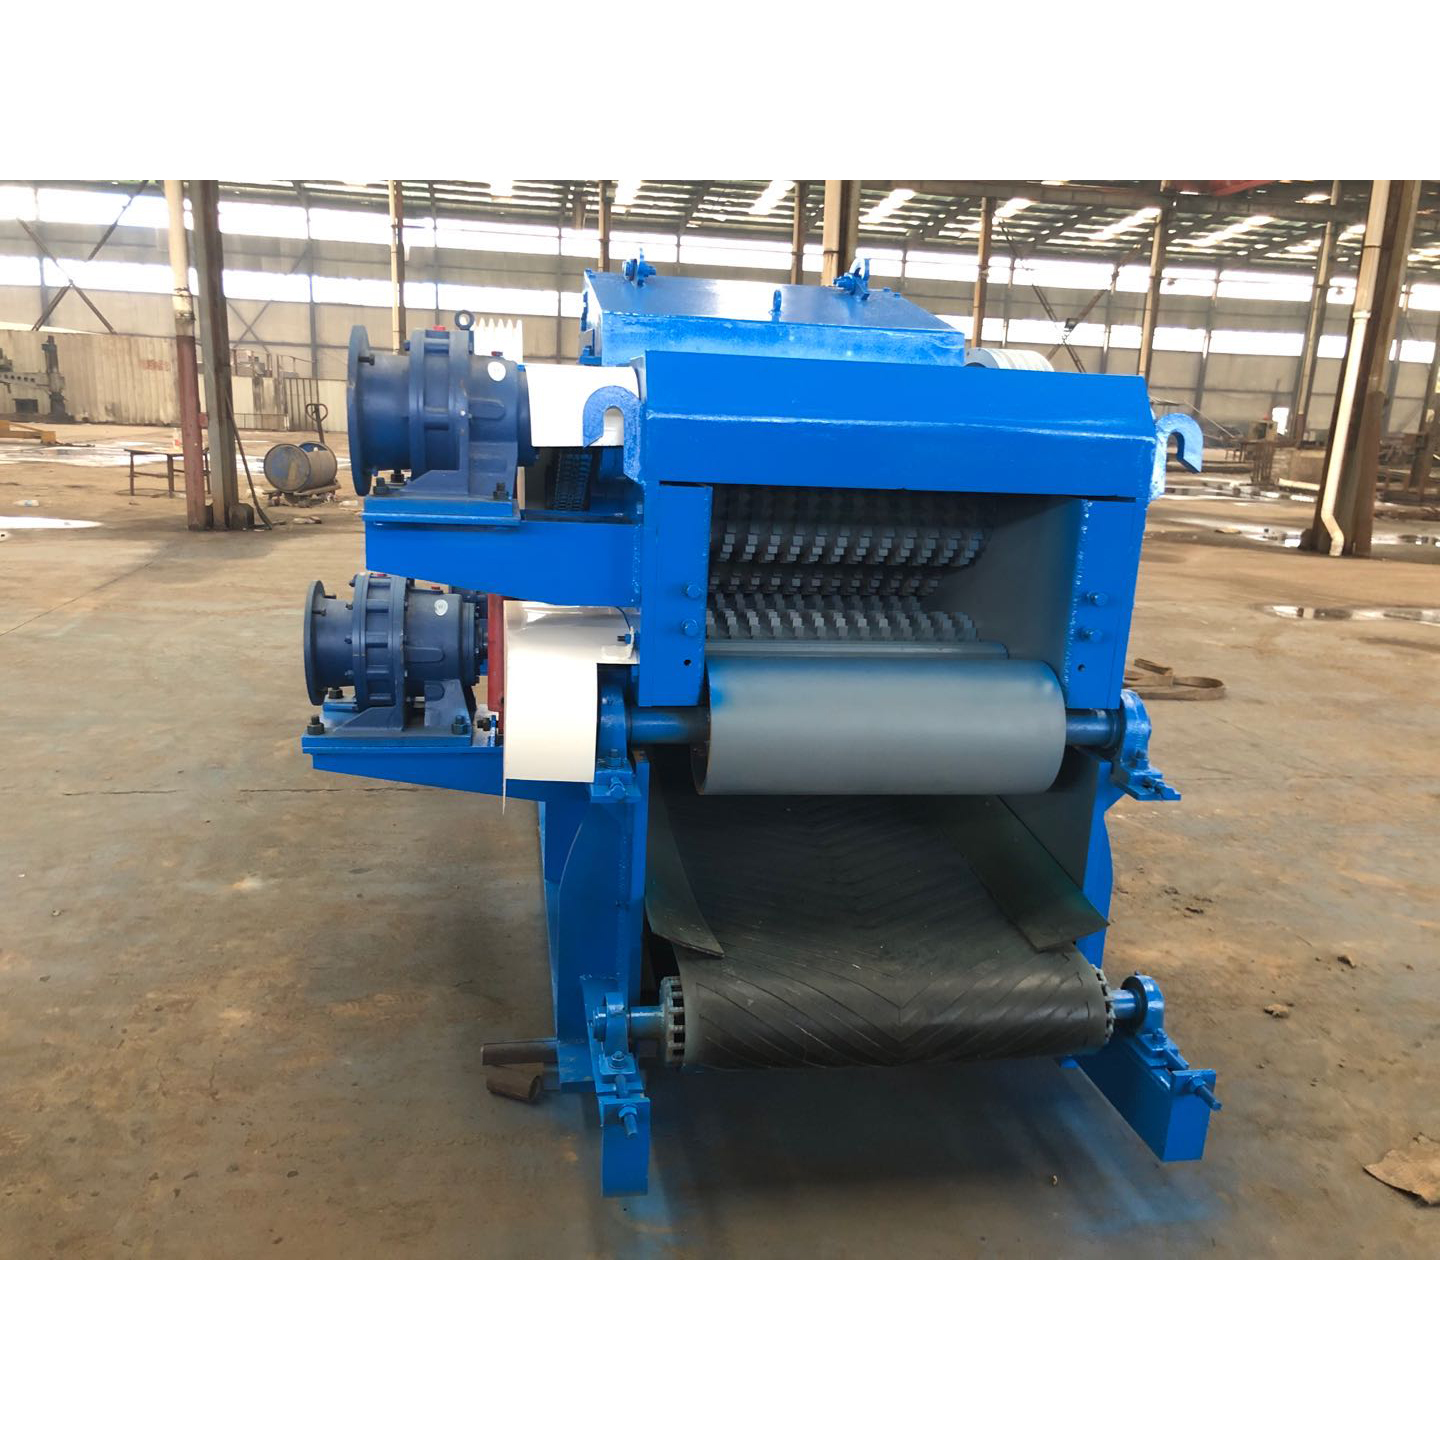 Wood Chipper For Sale Wood Crusher For waste wood logs Featured Image